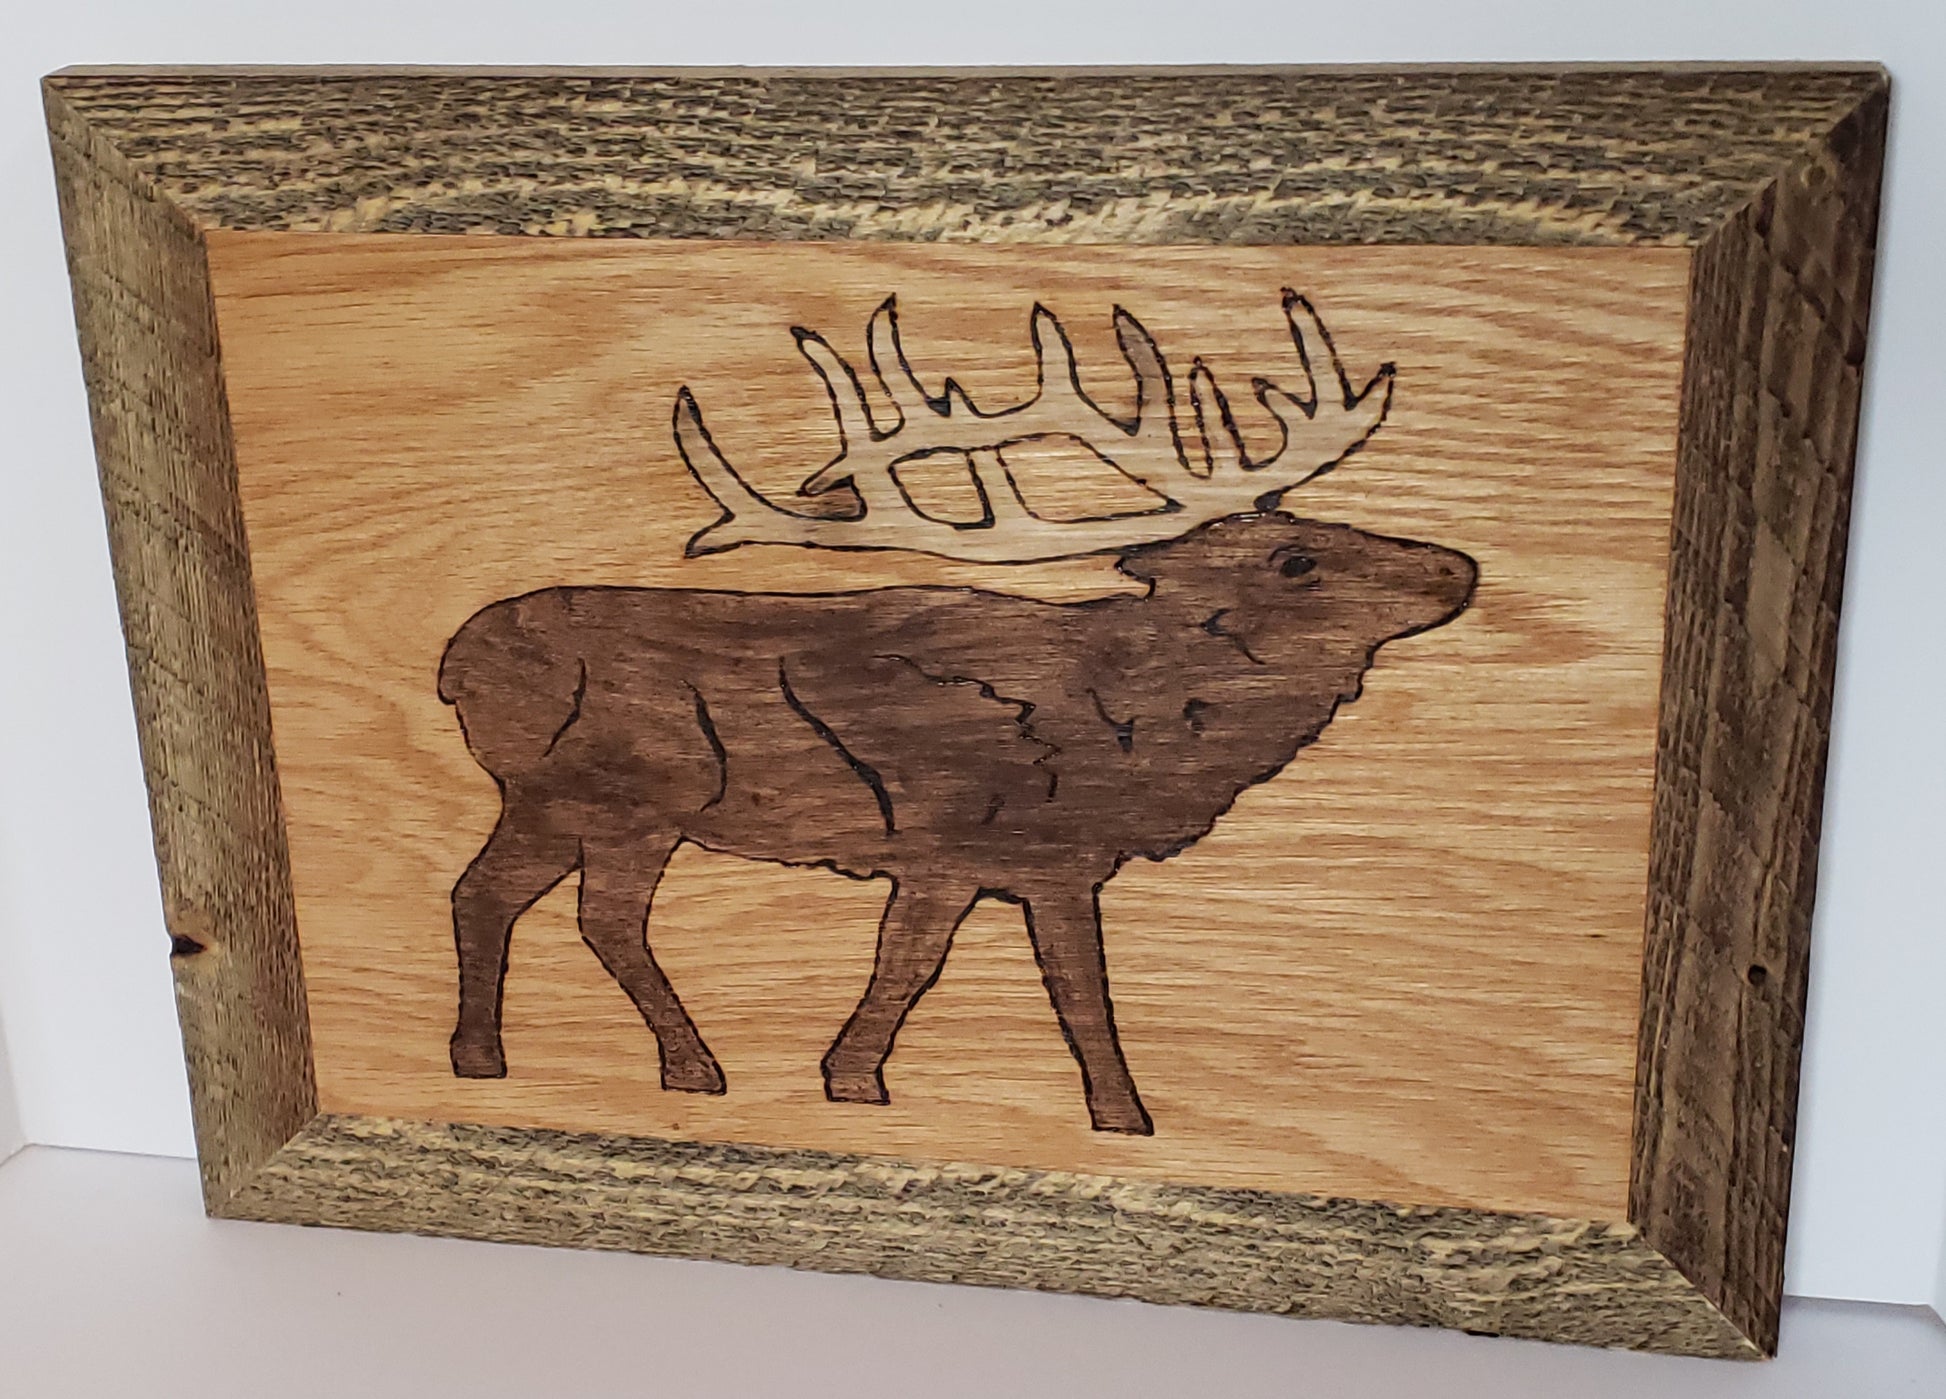 Wood Burned Elk Framed Wall Art Artist: Michael McMahon  Hardwood plywood sanded and burned  Detailed Elk outline stained in walnut  Golden oak background  Polyurethane coated  Rough cut wooden frame stained in brown  Wire hanger on the back  19" long x 14.5" high x .75" wide  Would be perfect for a cabin or for any outdoorsman